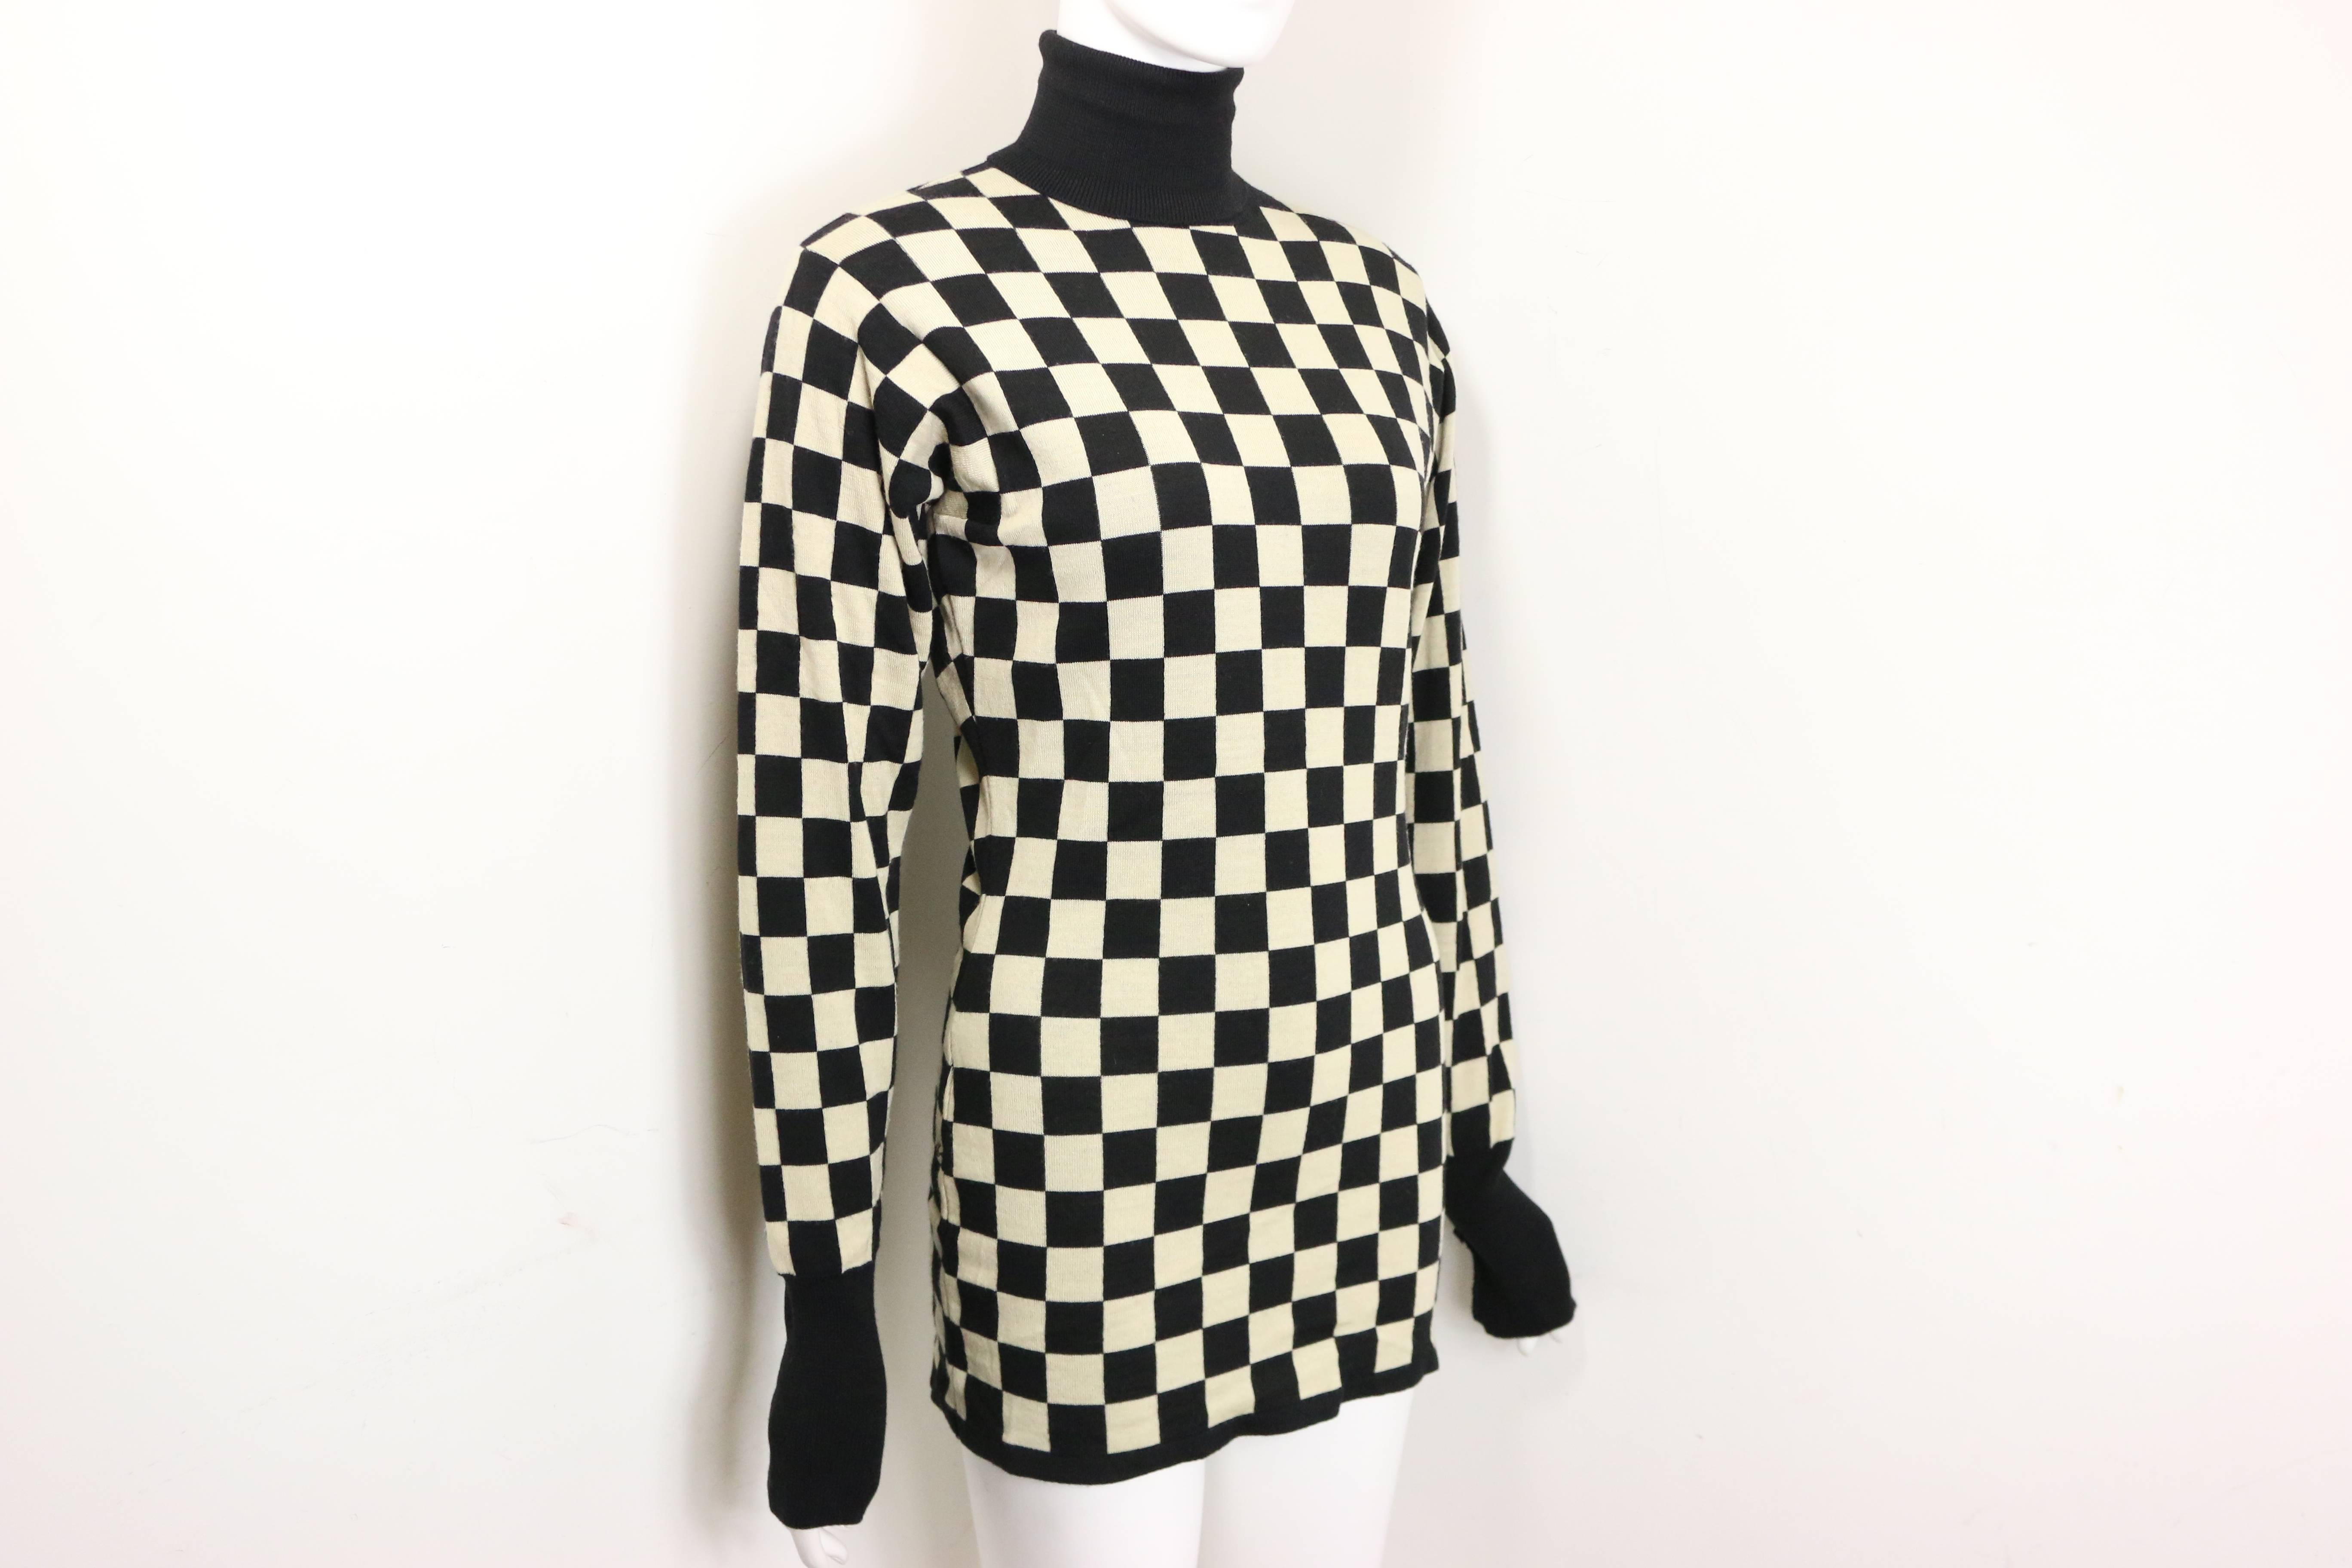 - Vintage 90s Moschino black and white wool check pattern turtleneck pullover sweater. 

- Made in Italy. 

- Shoulder: 16 inches. Bust: 32 inches. Height: 28 inches. Sleeves: 26 inches. 

- 100% Wool. 

